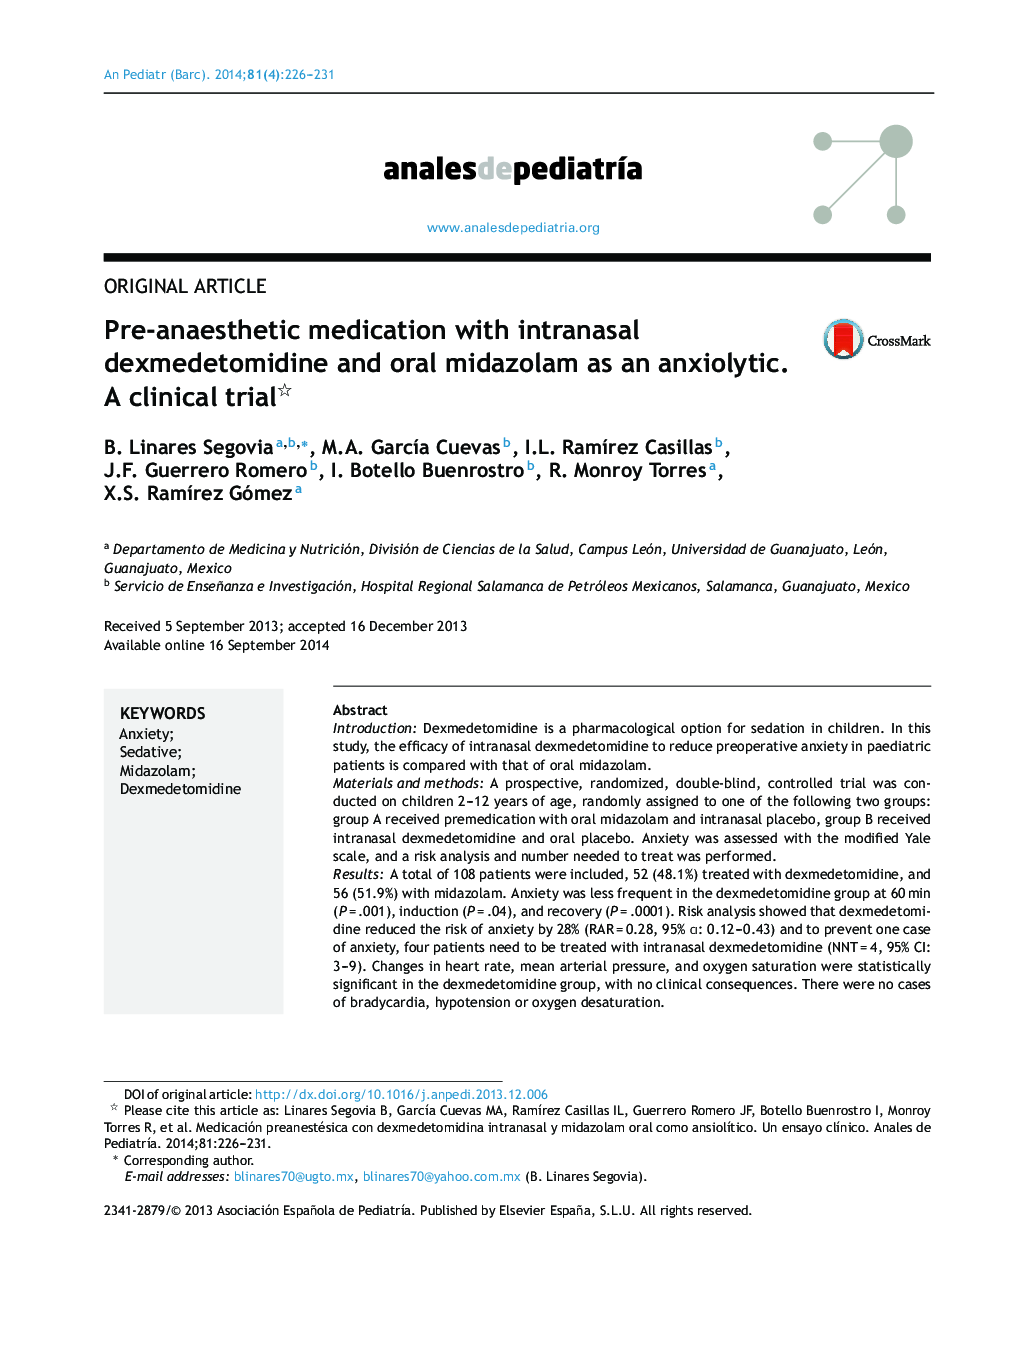 Pre-anaesthetic medication with intranasal dexmedetomidine and oral midazolam as an anxiolytic. A clinical trial 